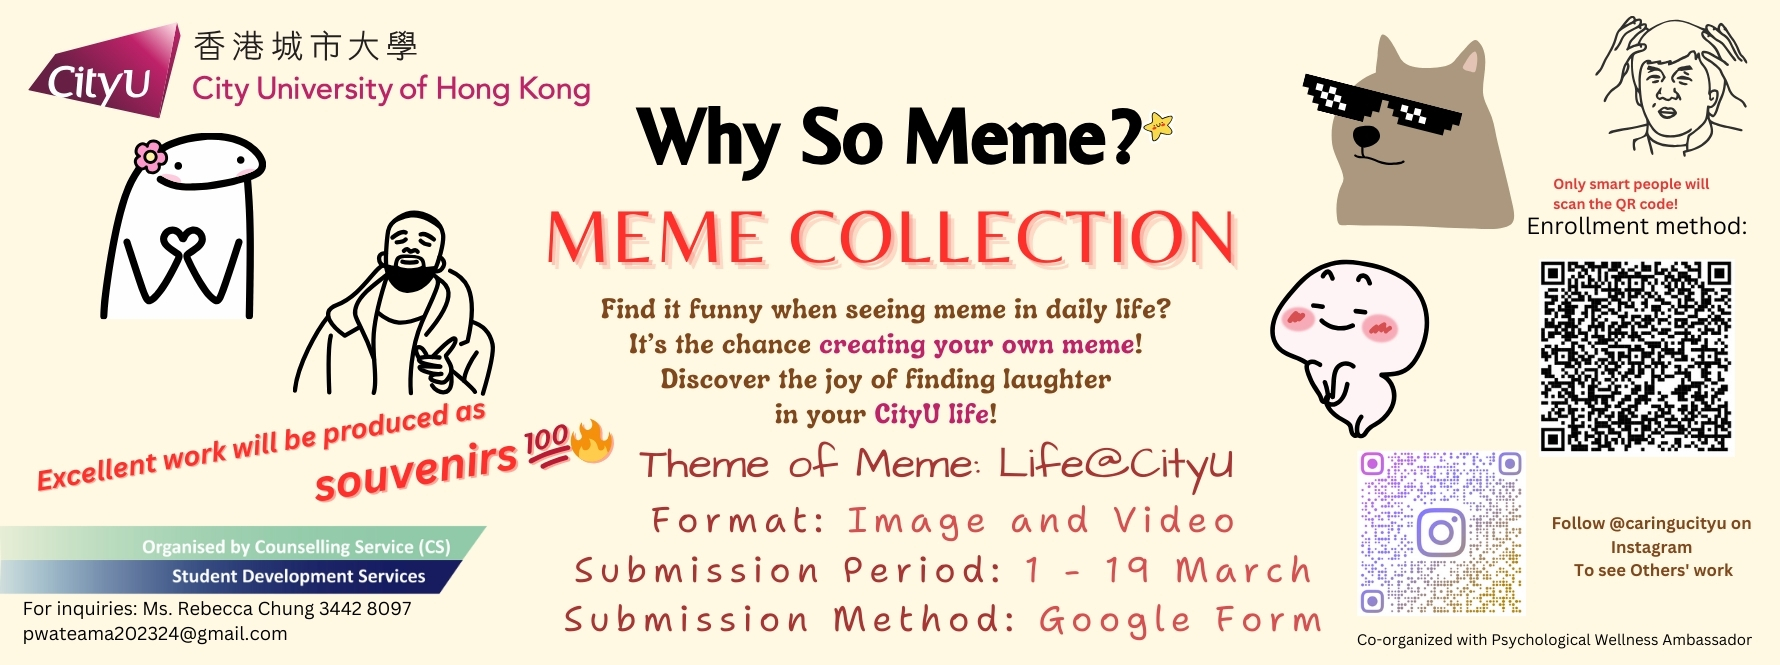 Why So Meme? MEME Collection